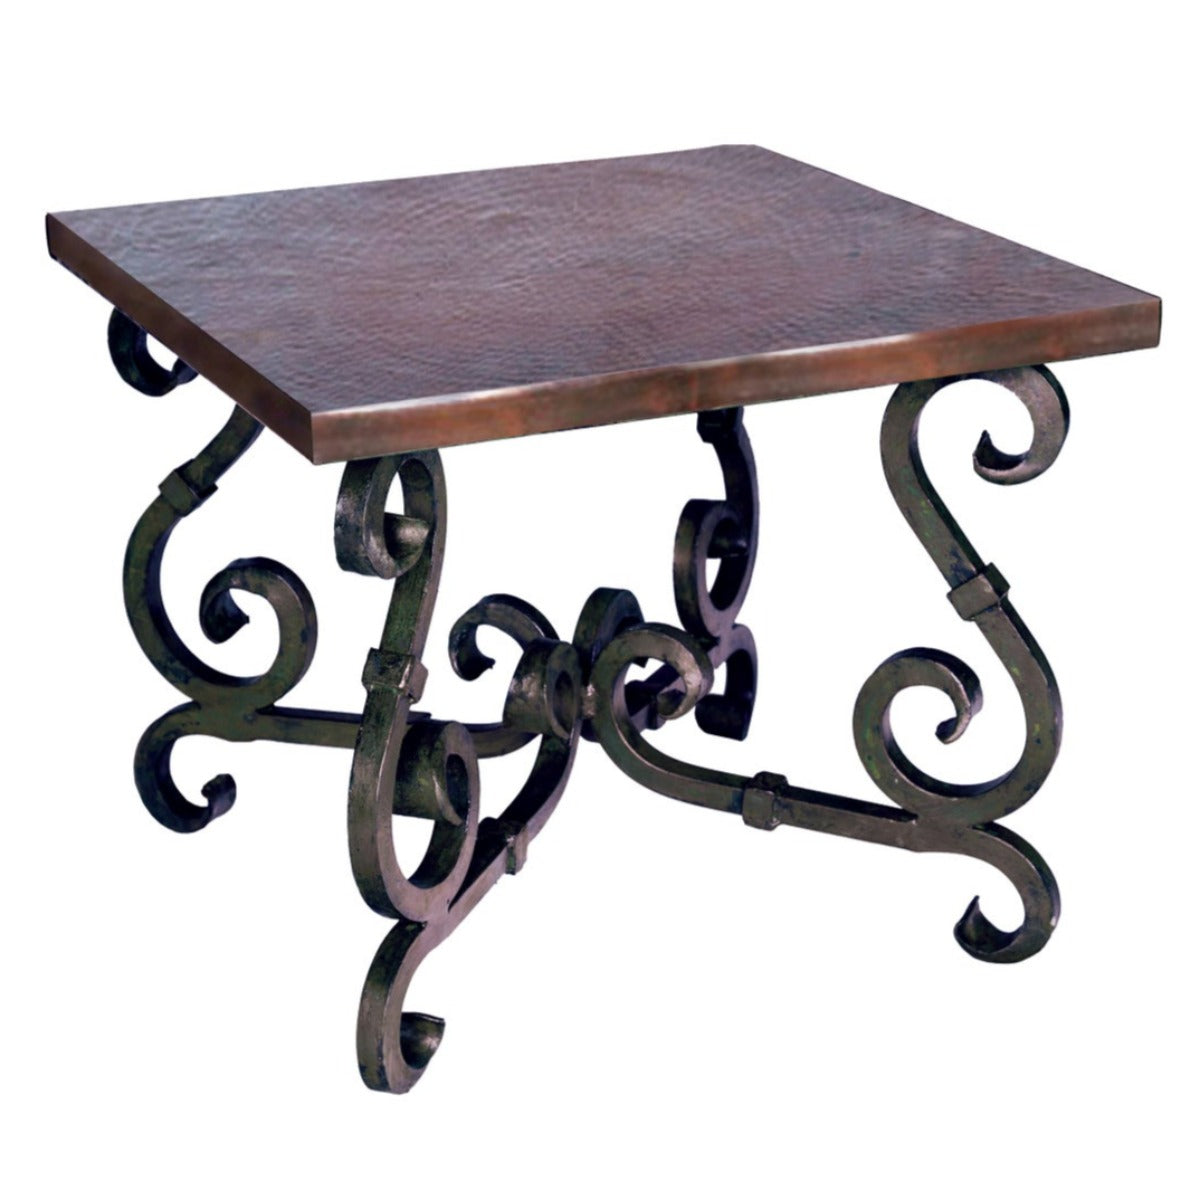 French Square End Table - Dark Copper